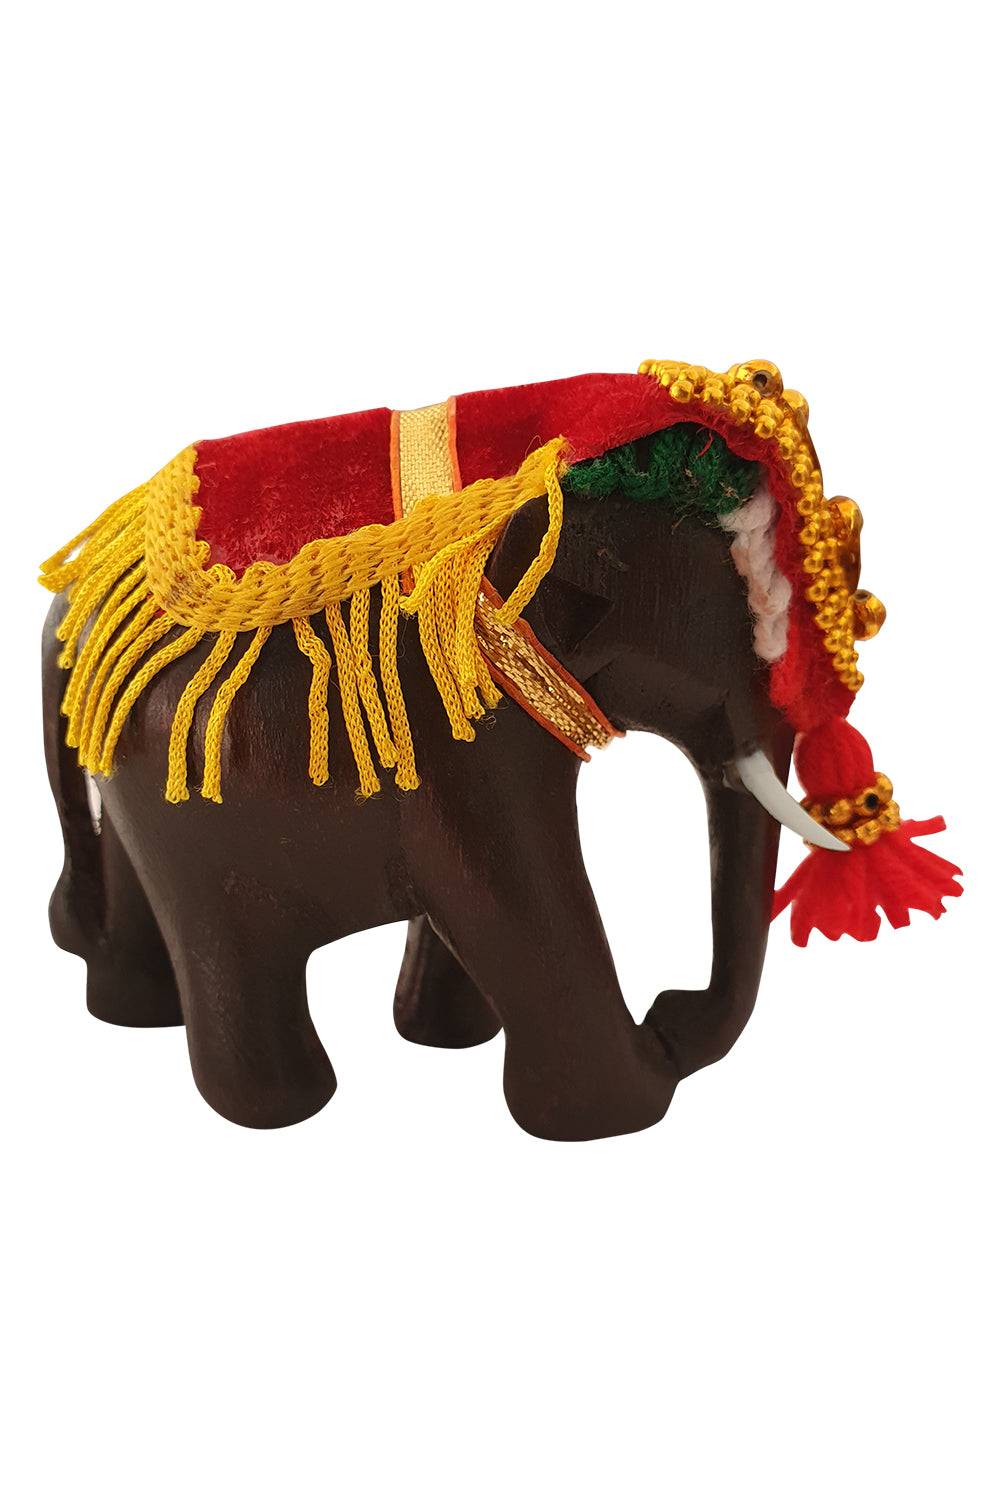 Southloom Handmade Temple Elephant Handicraft (Carved from Mahogany Wood) 3 Inches